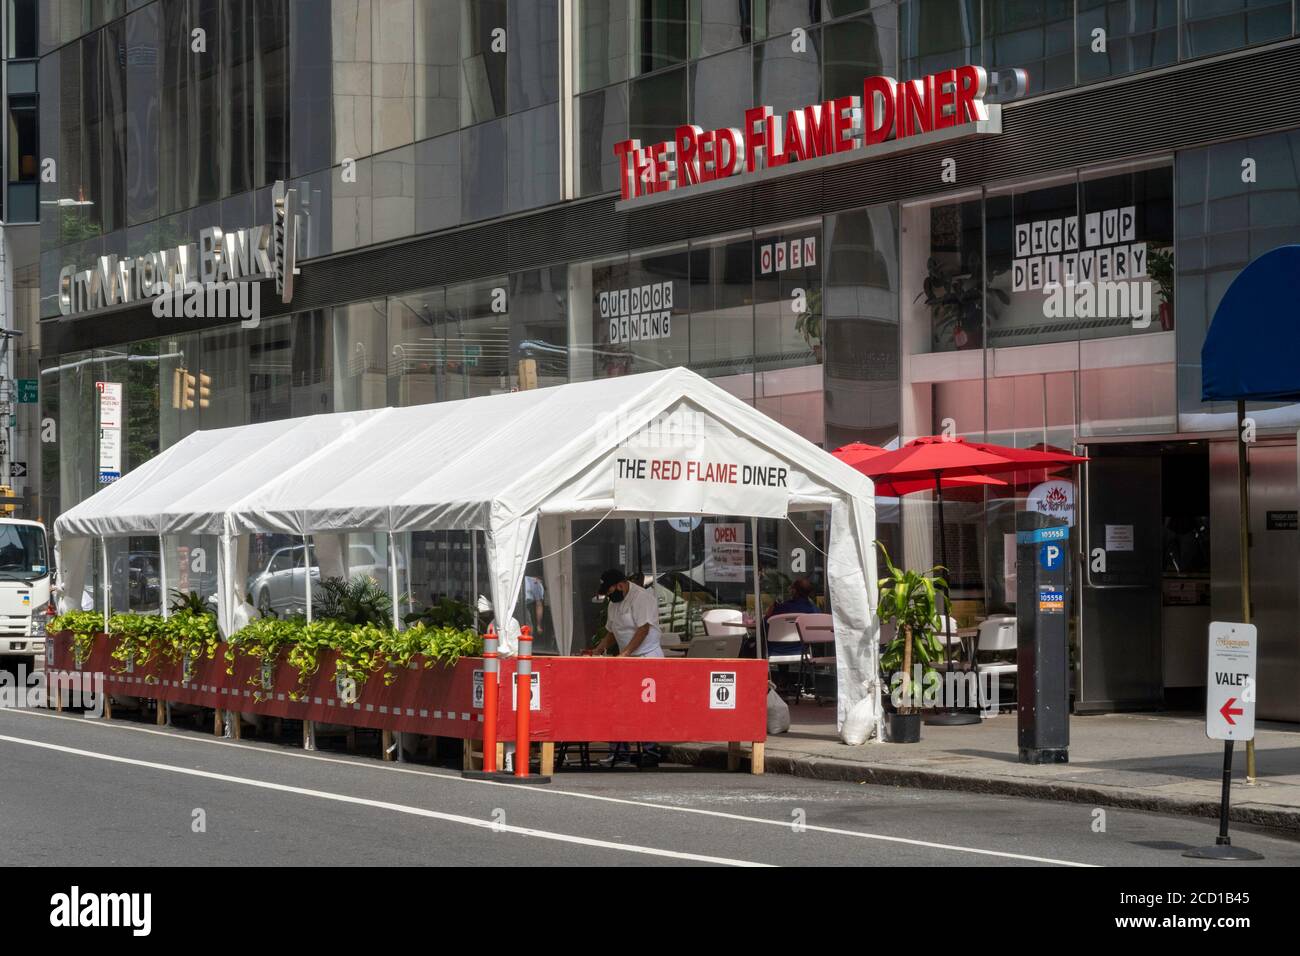 Outdoor Dining Tent, The Red Flame Diner, West 44th st, NYC, 2020 Stock Photo